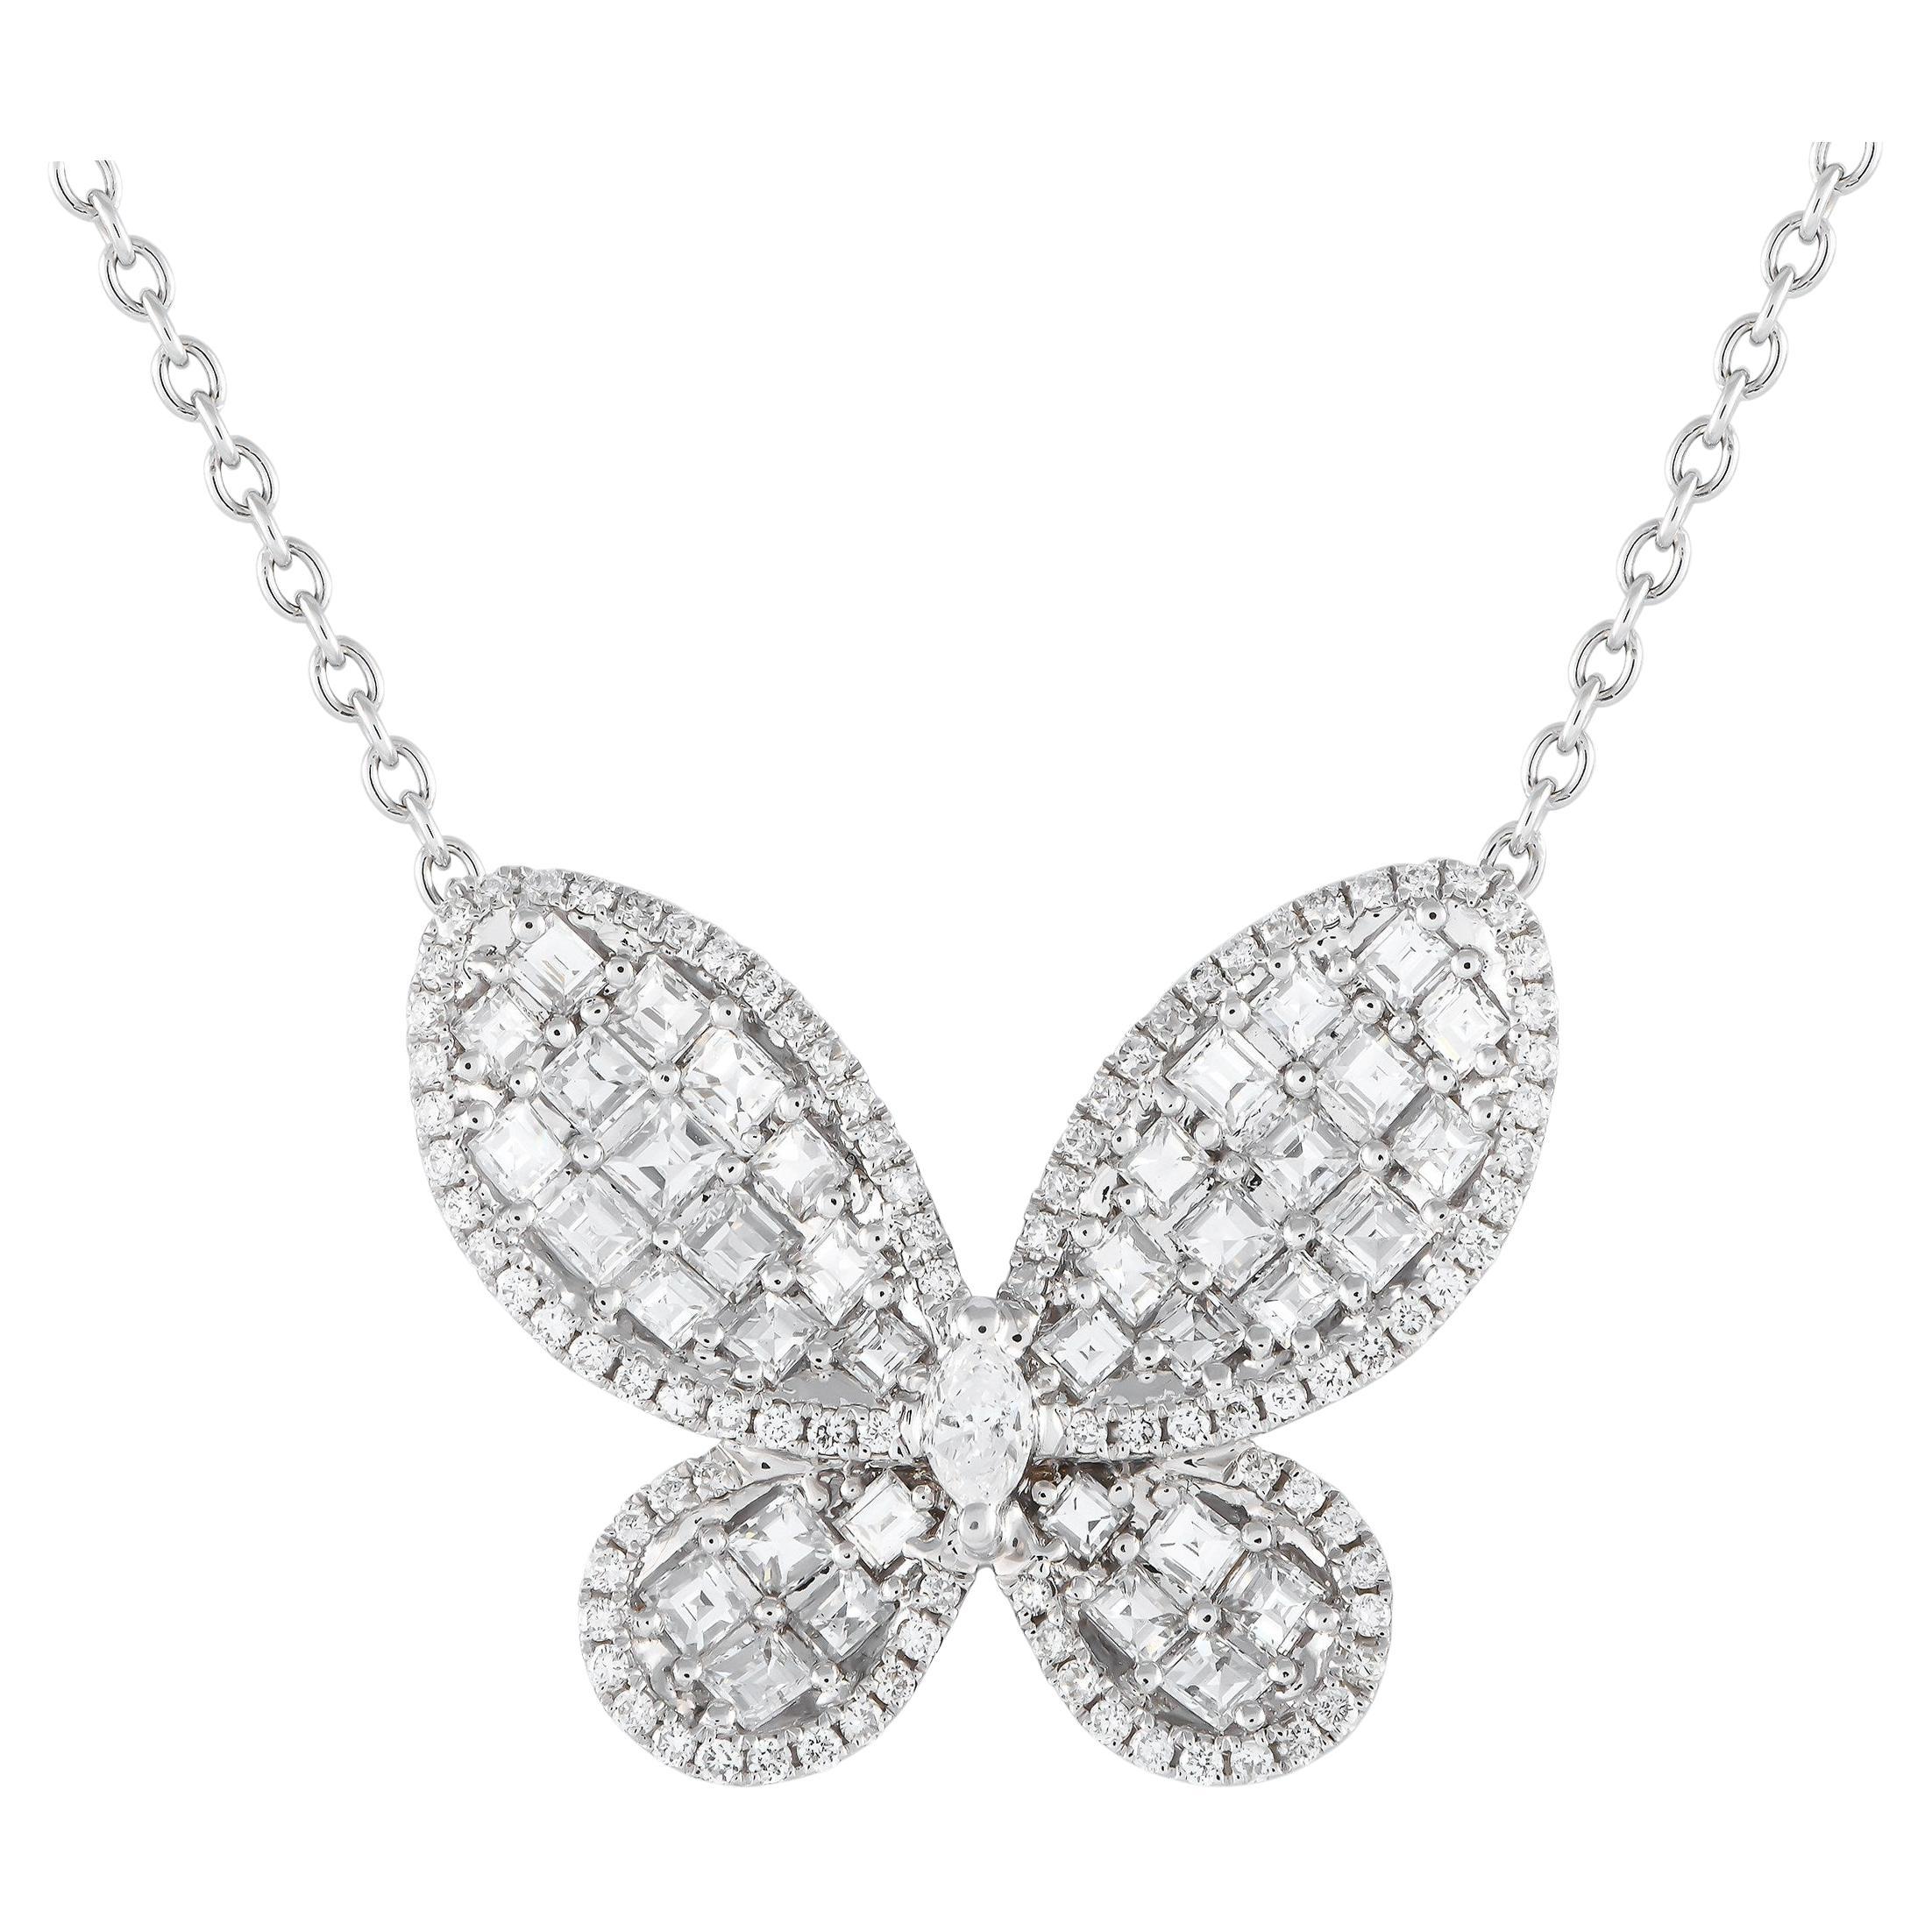 LB Exclusive 18K White Gold 2.0ct Diamond Butterfly Necklace